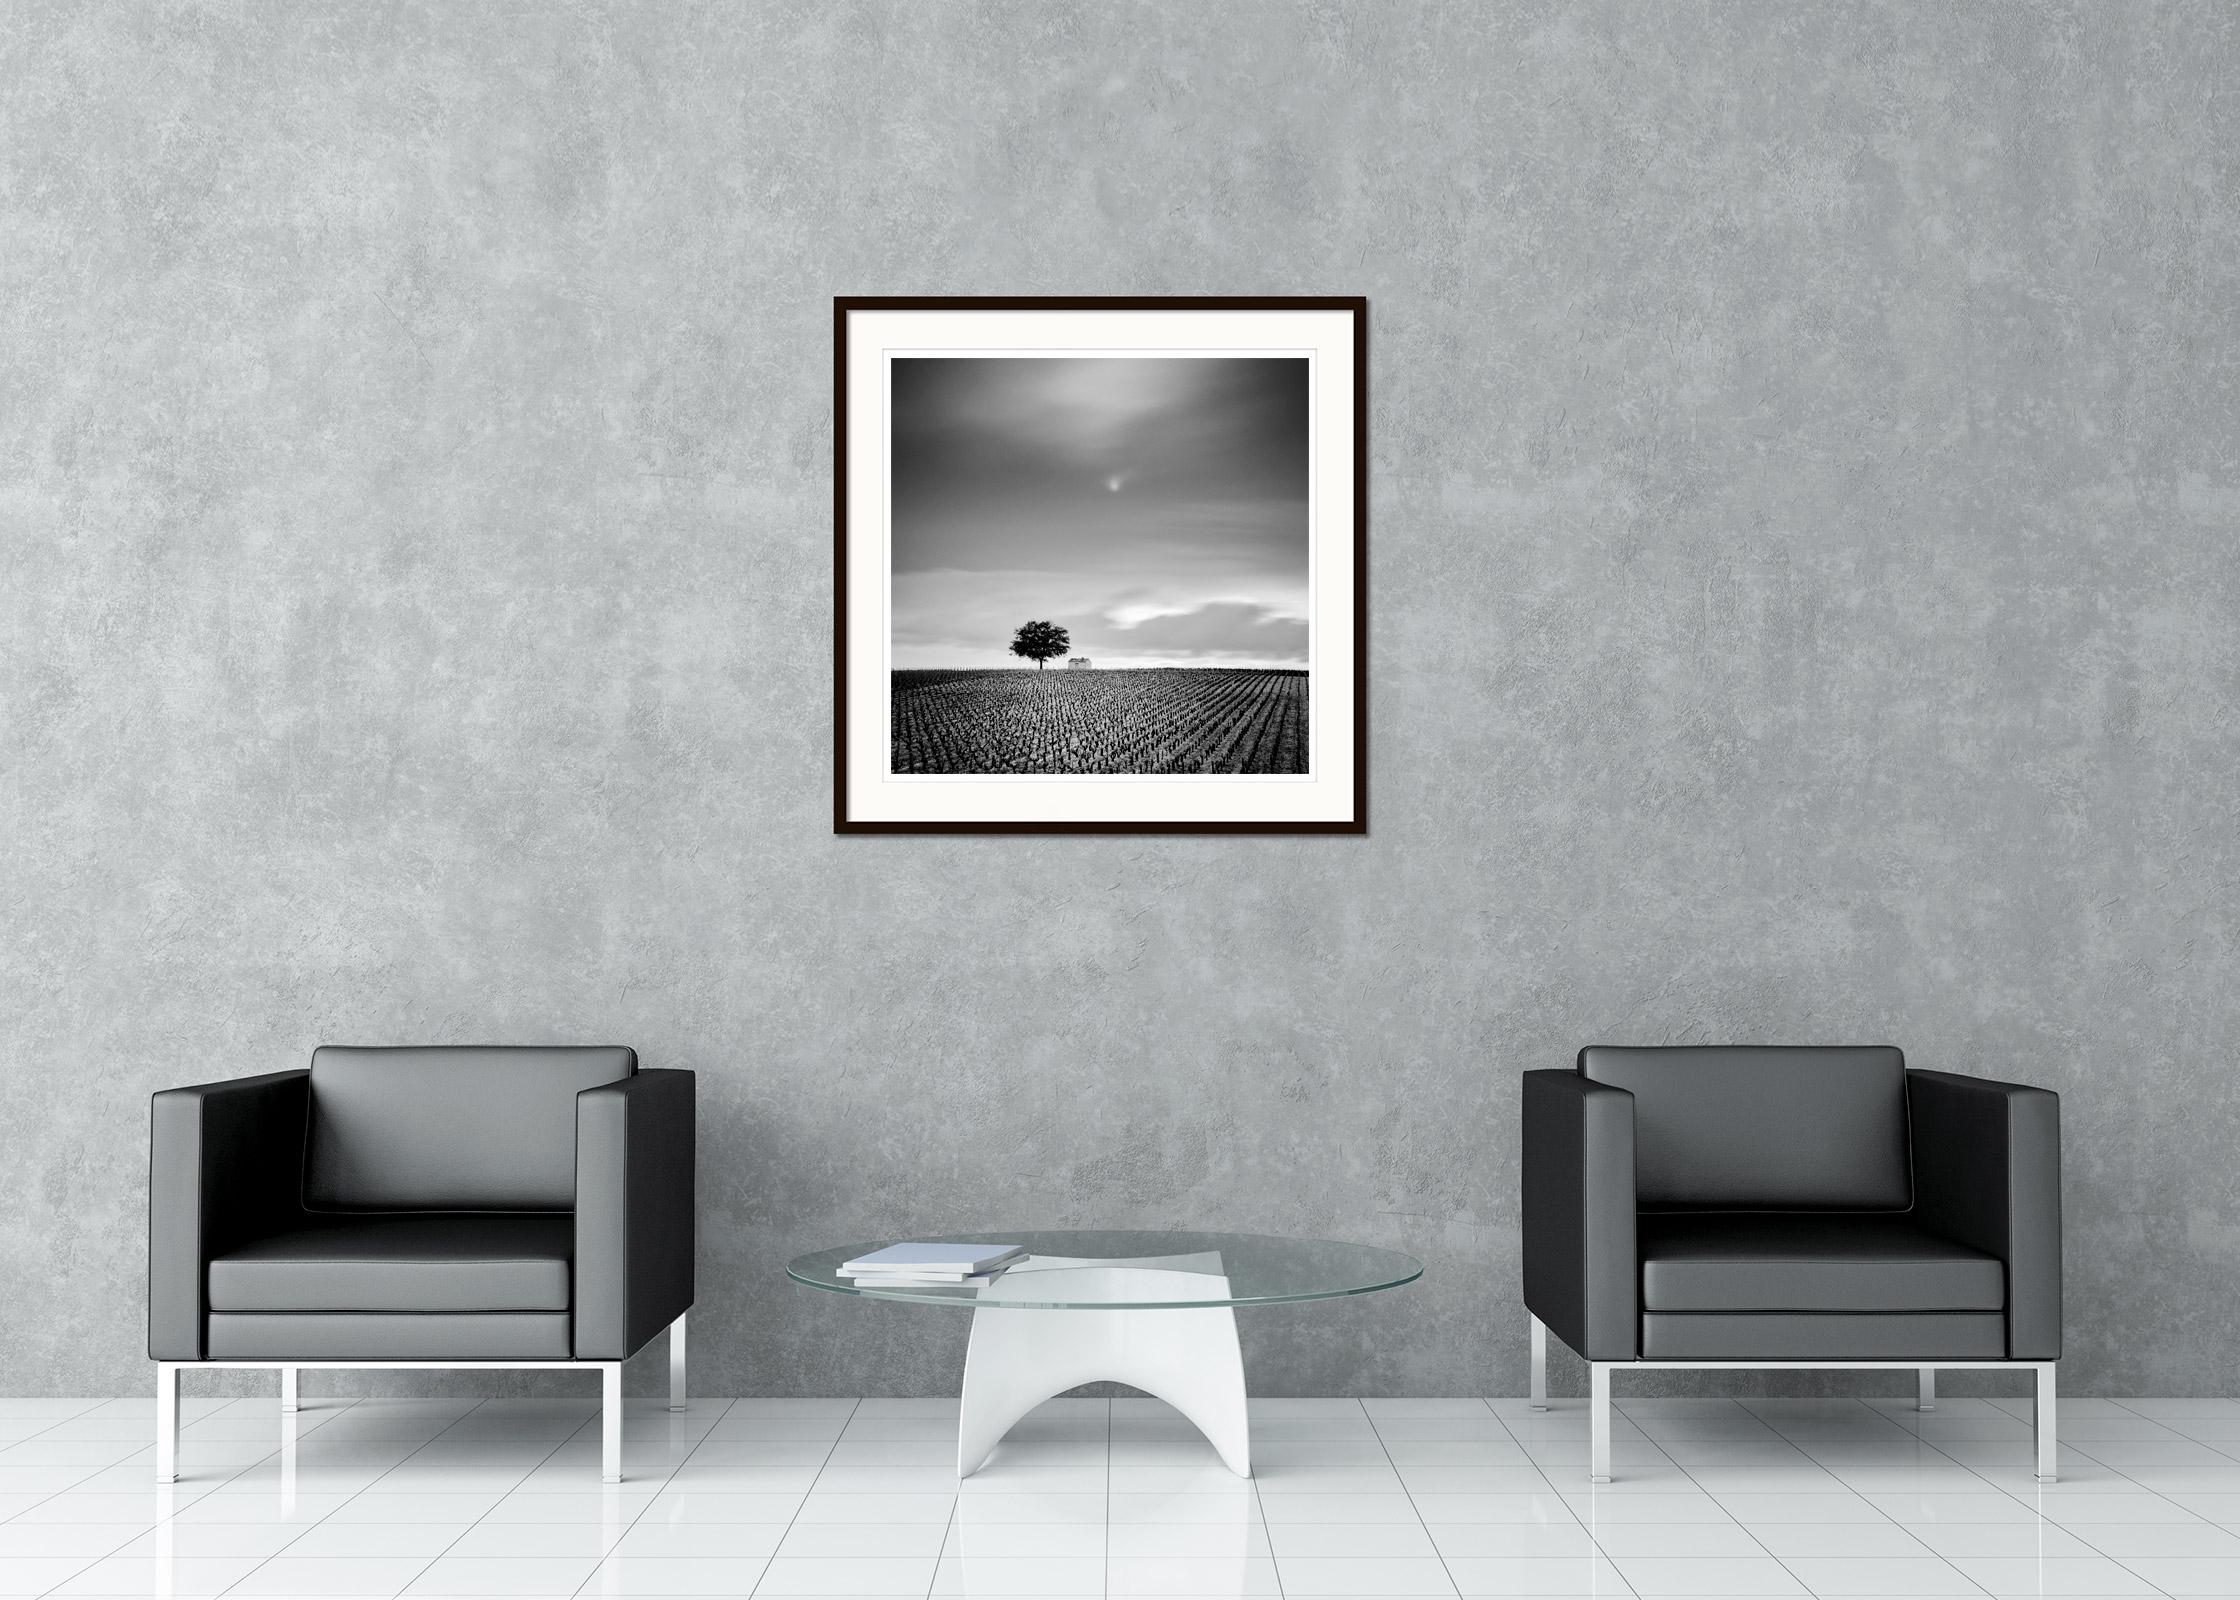 Black and white fine art landscape photography. Single tree with small hut at the beautiful vineyard in the Champagne in France. Archival pigment ink print, edition of 15. Signed, titled, dated and numbered by artist. Certificate of authenticity